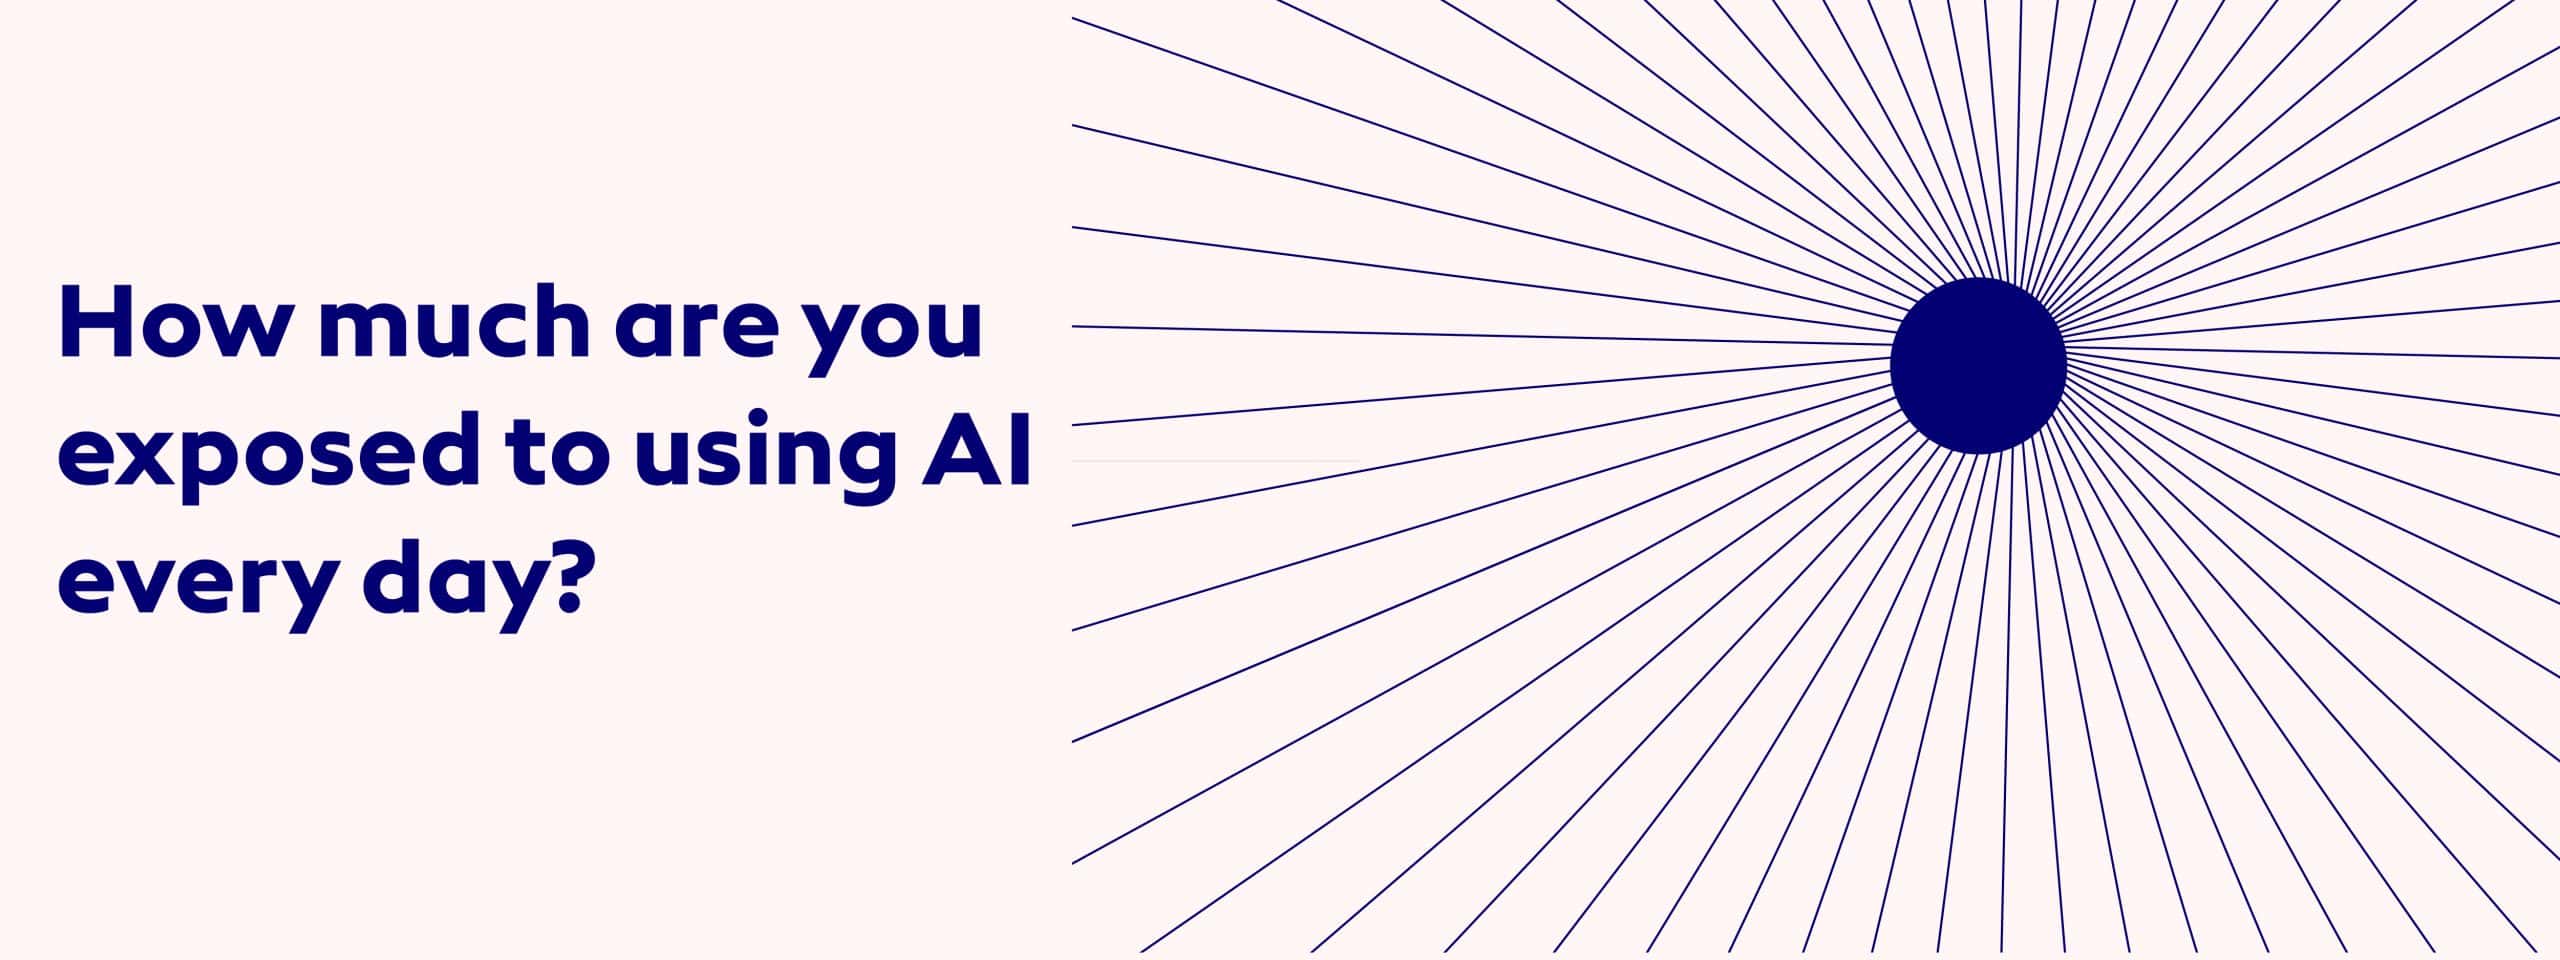 How much are you exposed to using AI every day? 